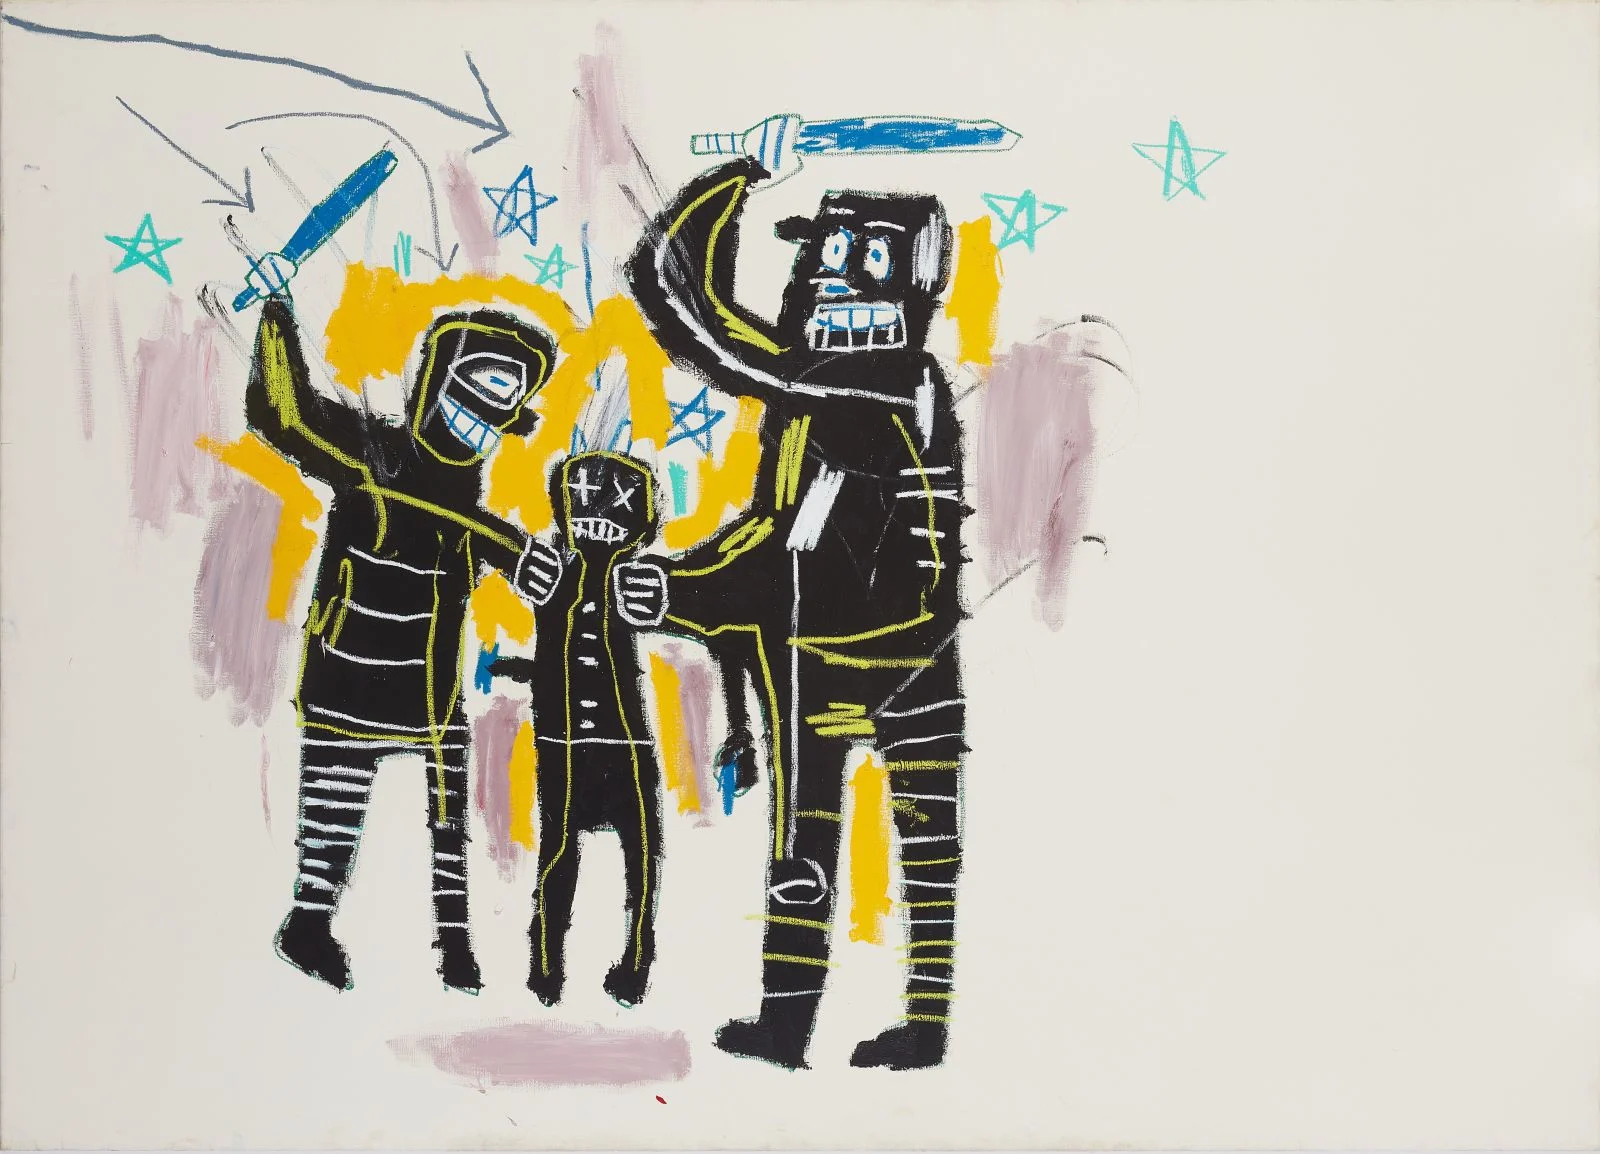 Michel Basquiat, Untitled (World Famous Vol. 1. Thesis), 1983. © The Estate of Jean-Michel Basquiat, Crayon on paper, Framed and glazed. Jailbirds, 1983. © The Estate of Jean-Michel Basquiat